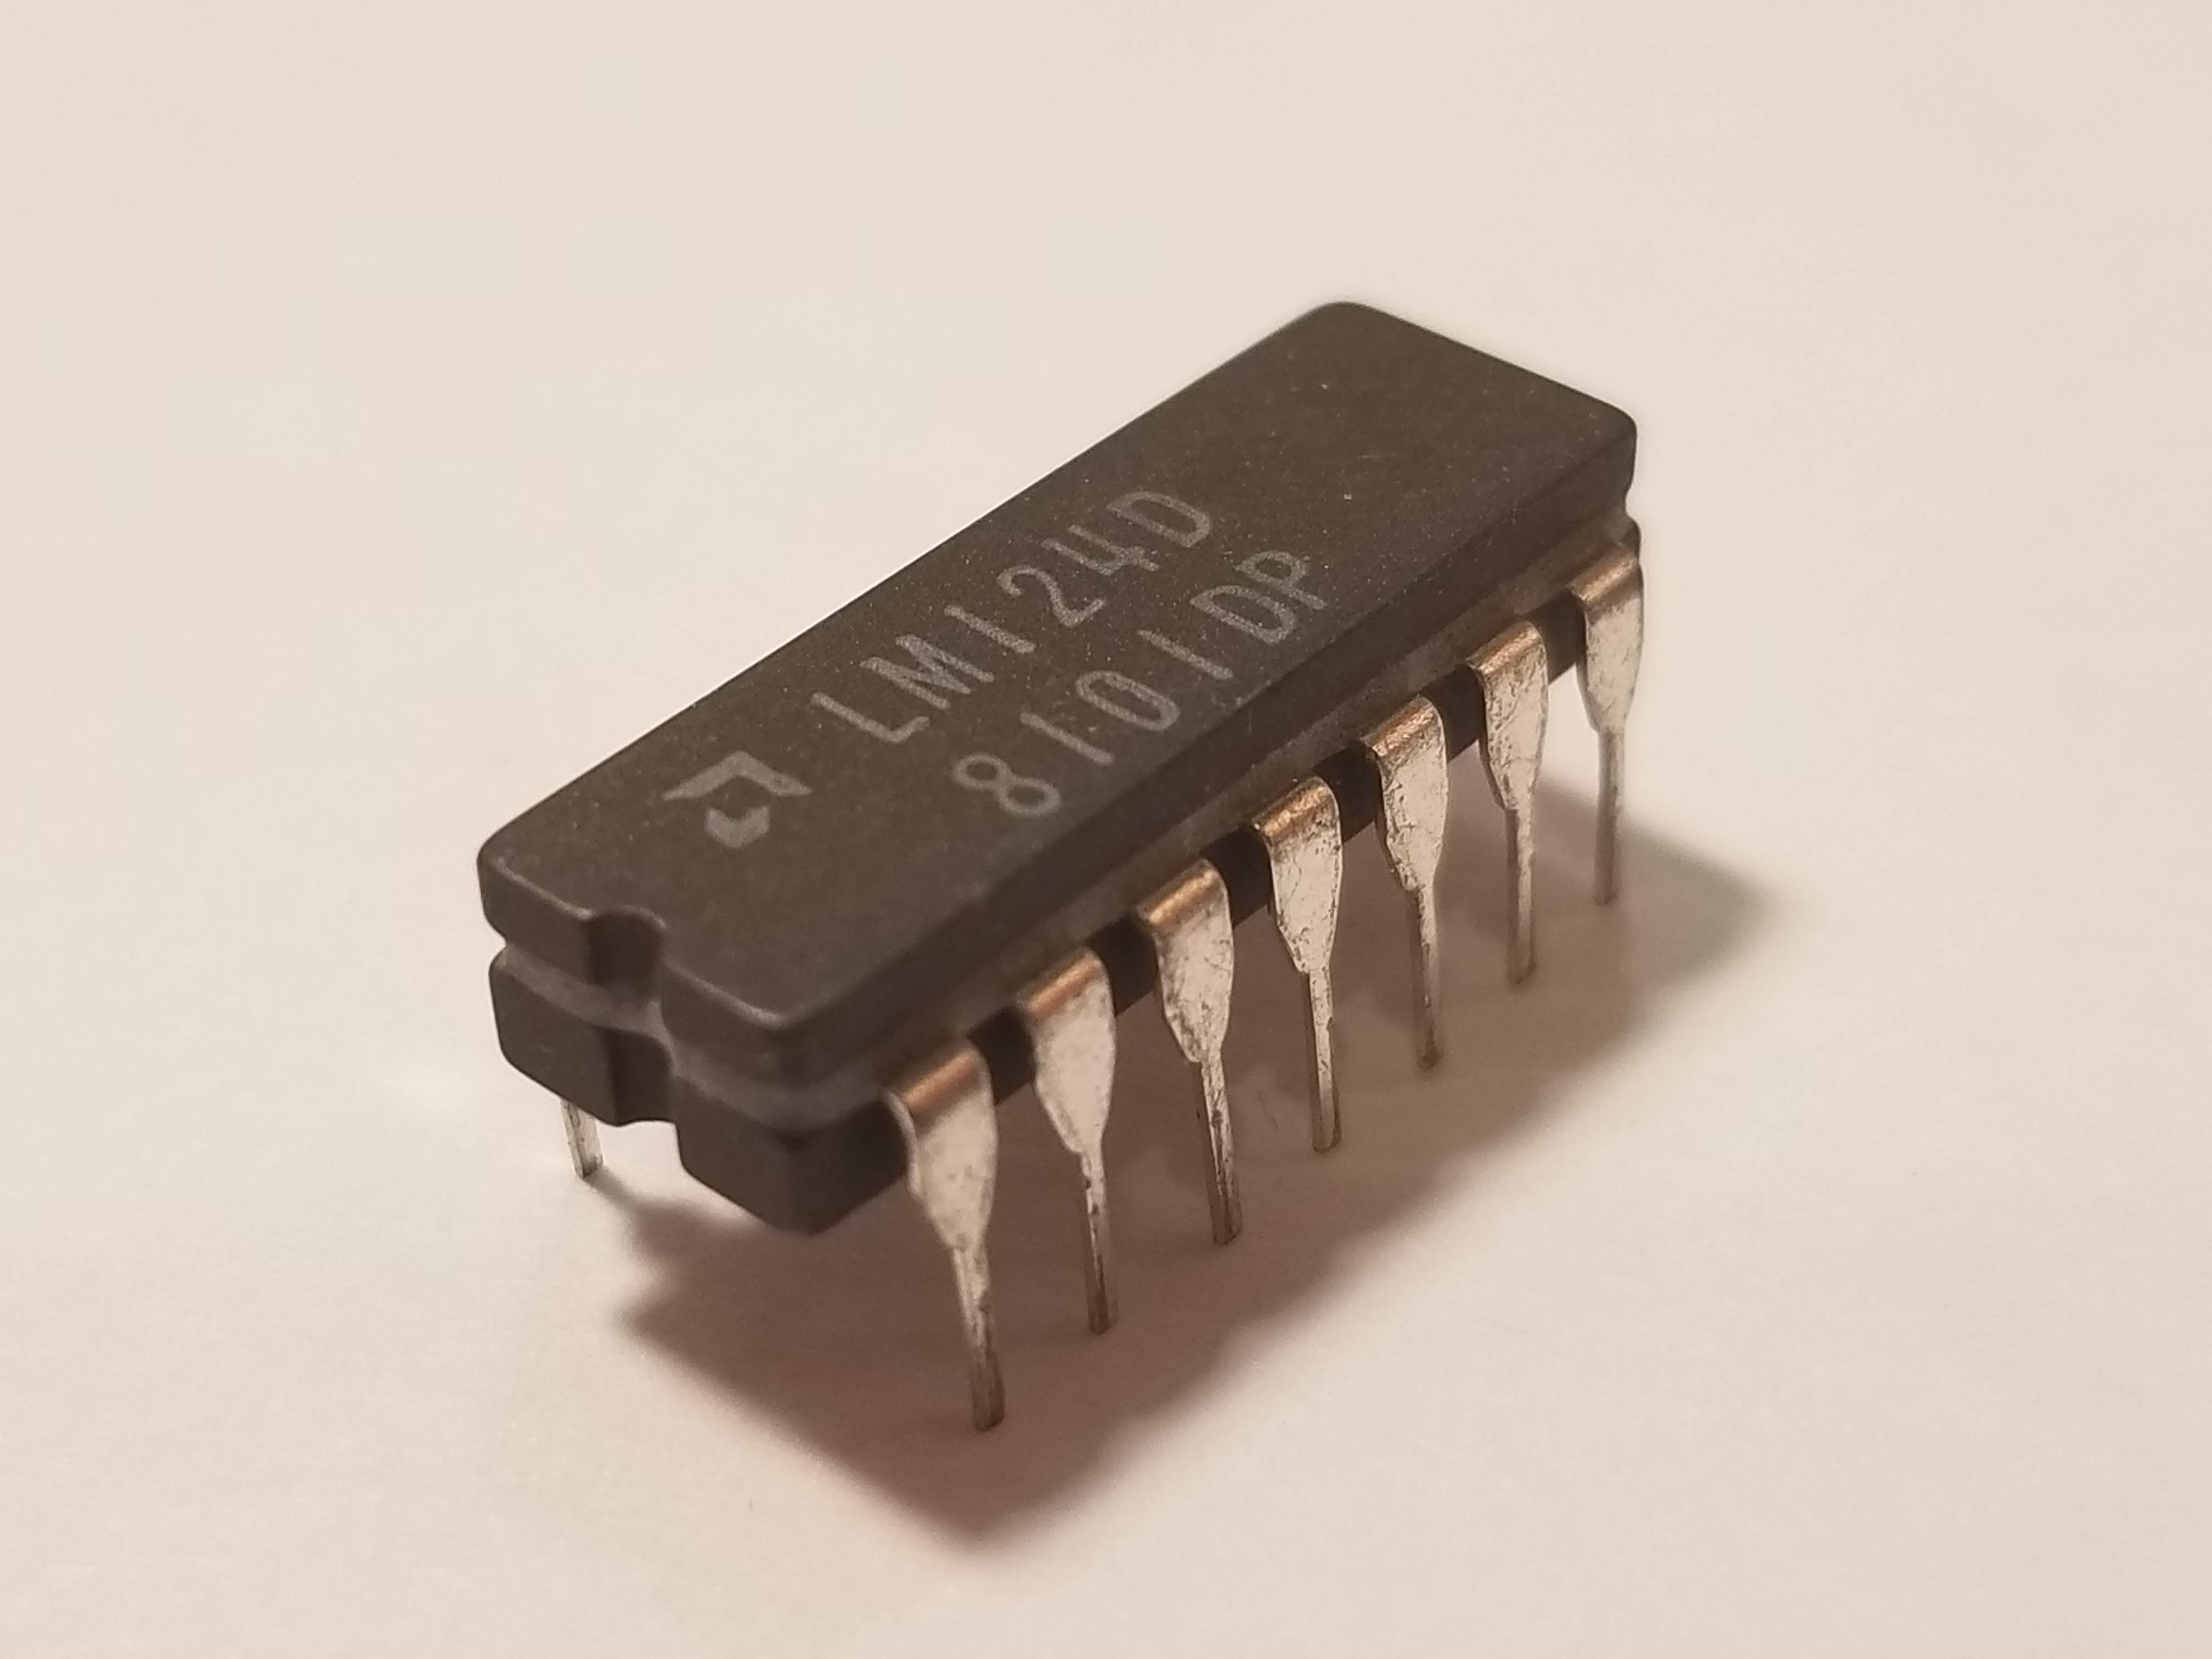 Picture of LM124 Quad Low Power Op-Amp